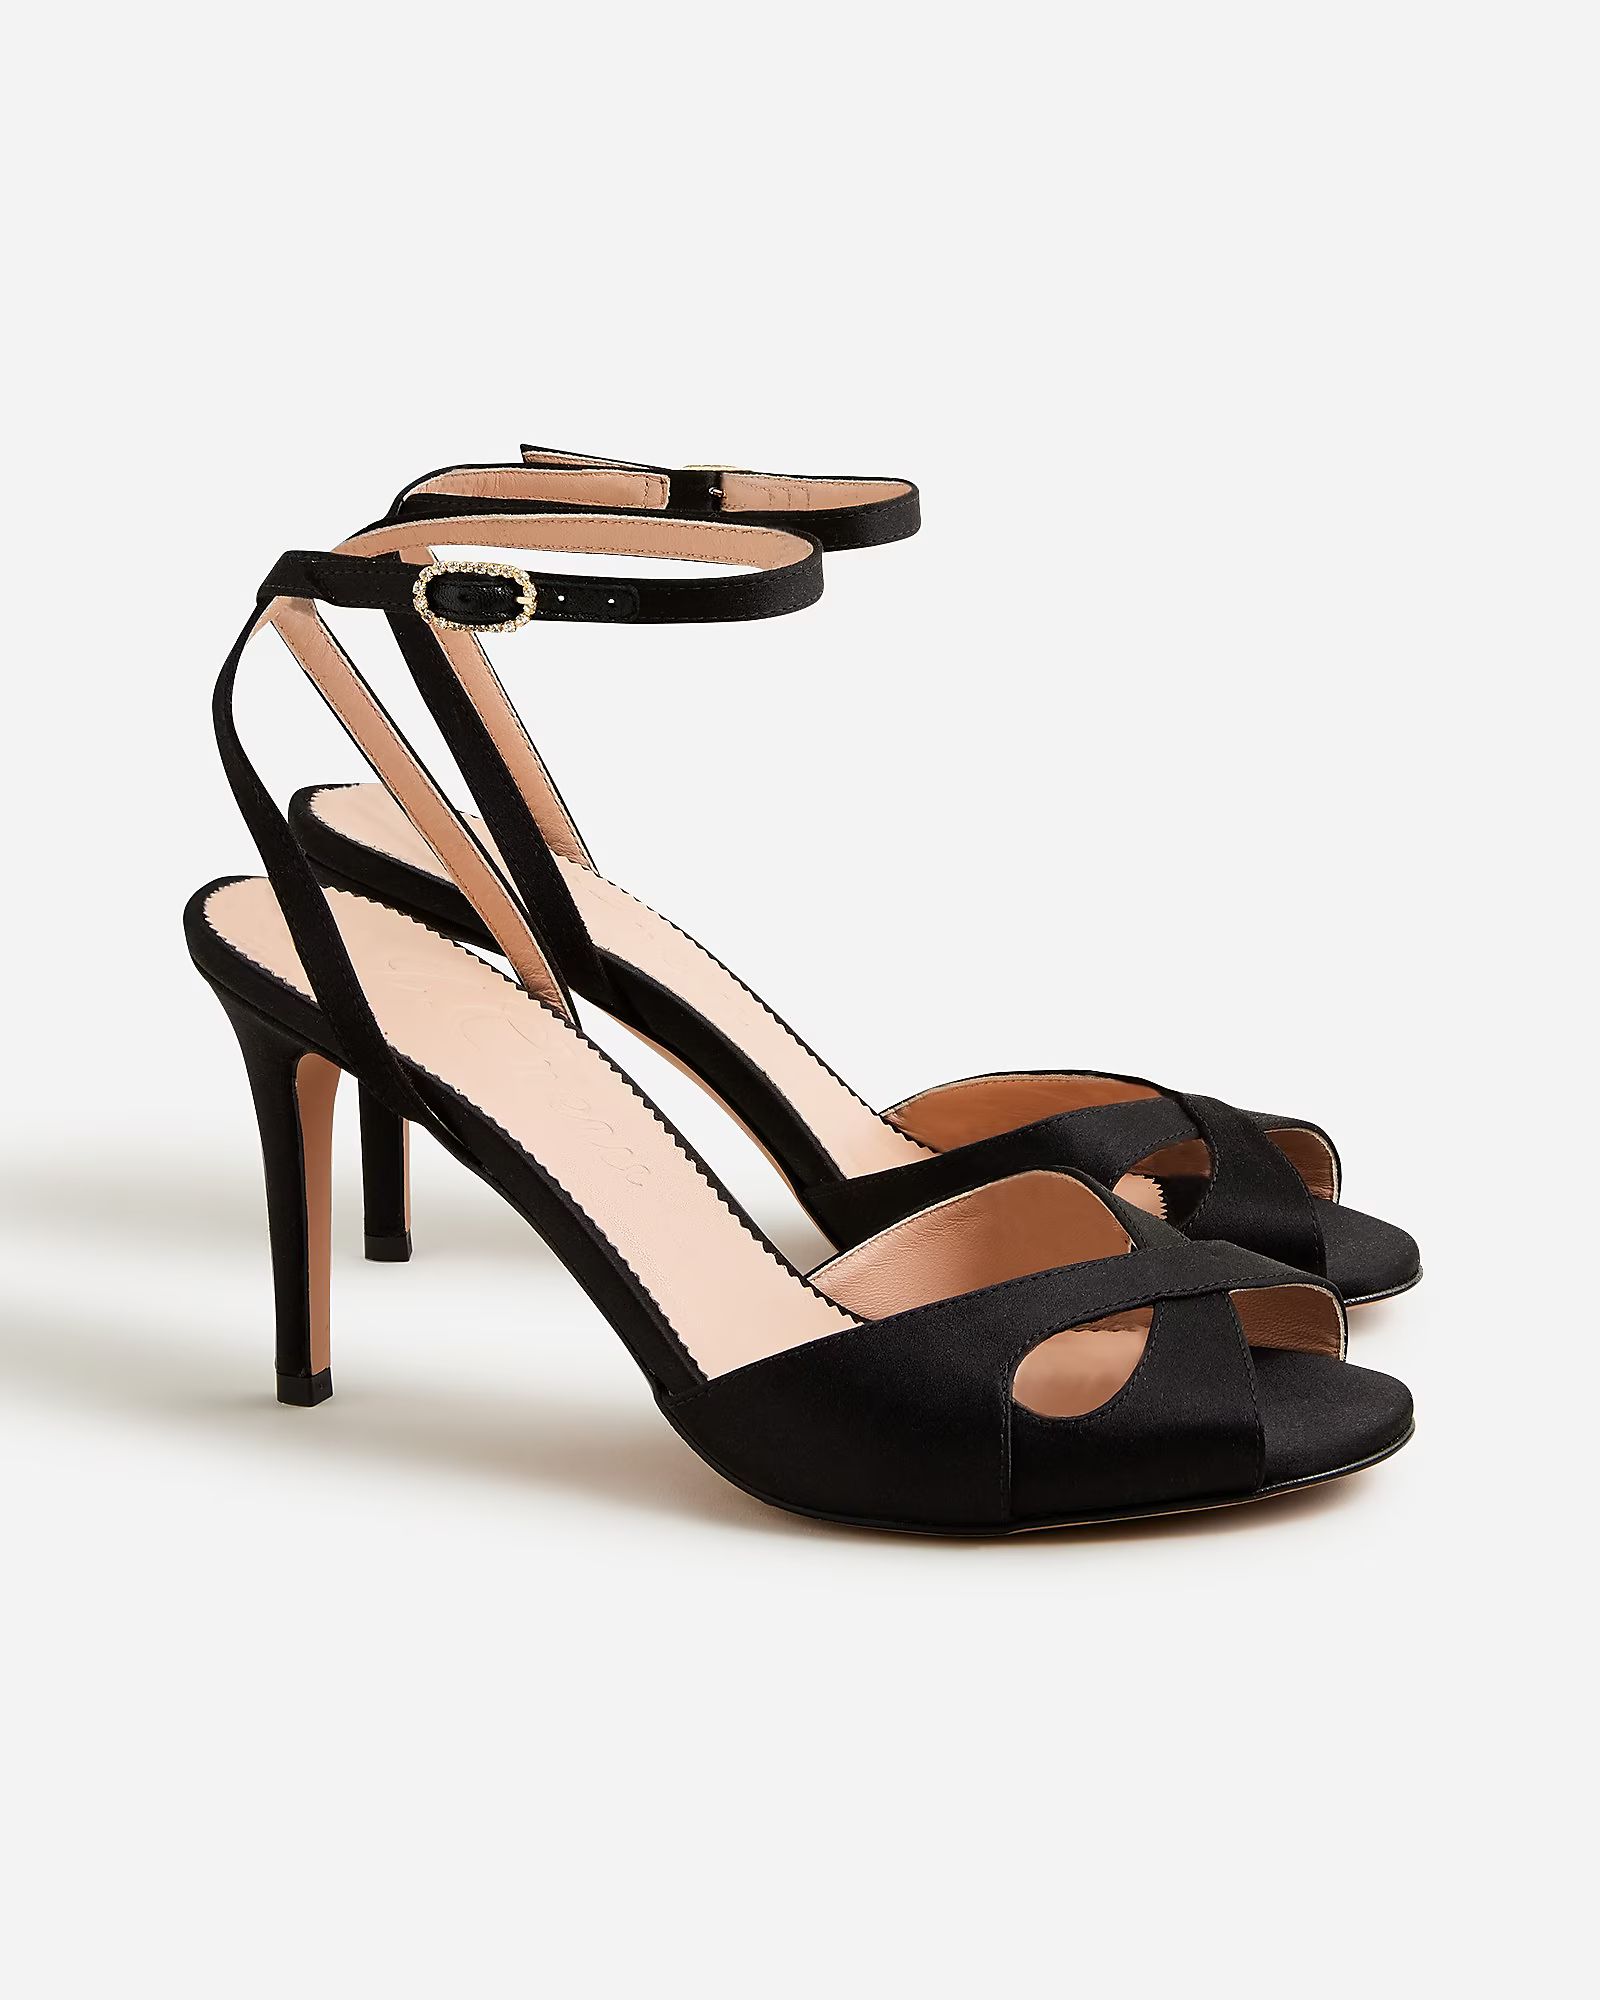 Collection Rylie cutout heels in Italian satin | J.Crew US